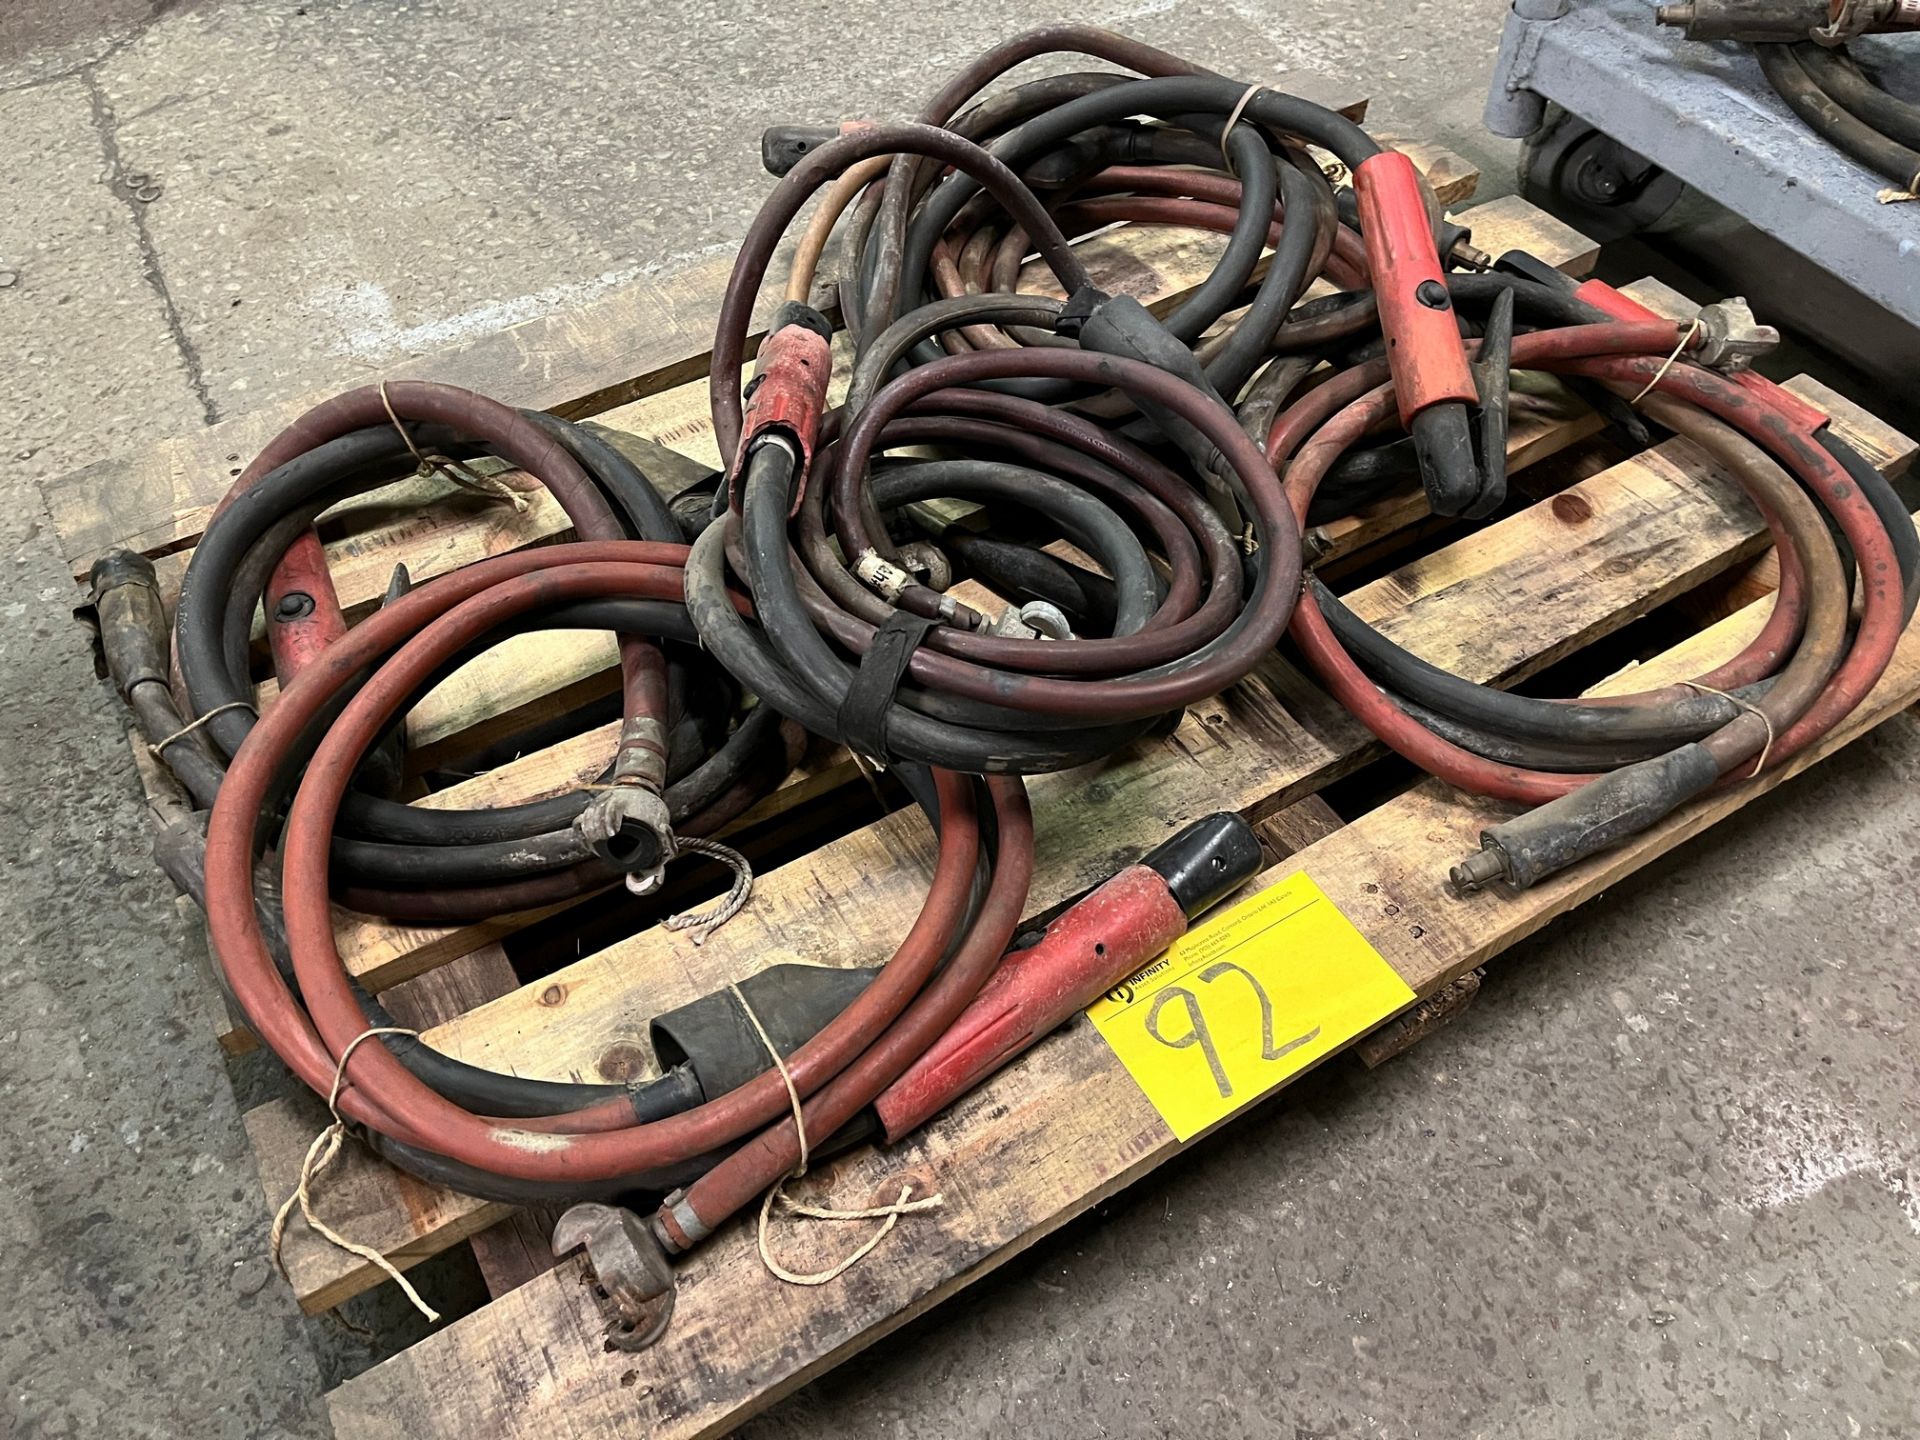 LOT OF (6) GROUNDING CABLES ON PALLET